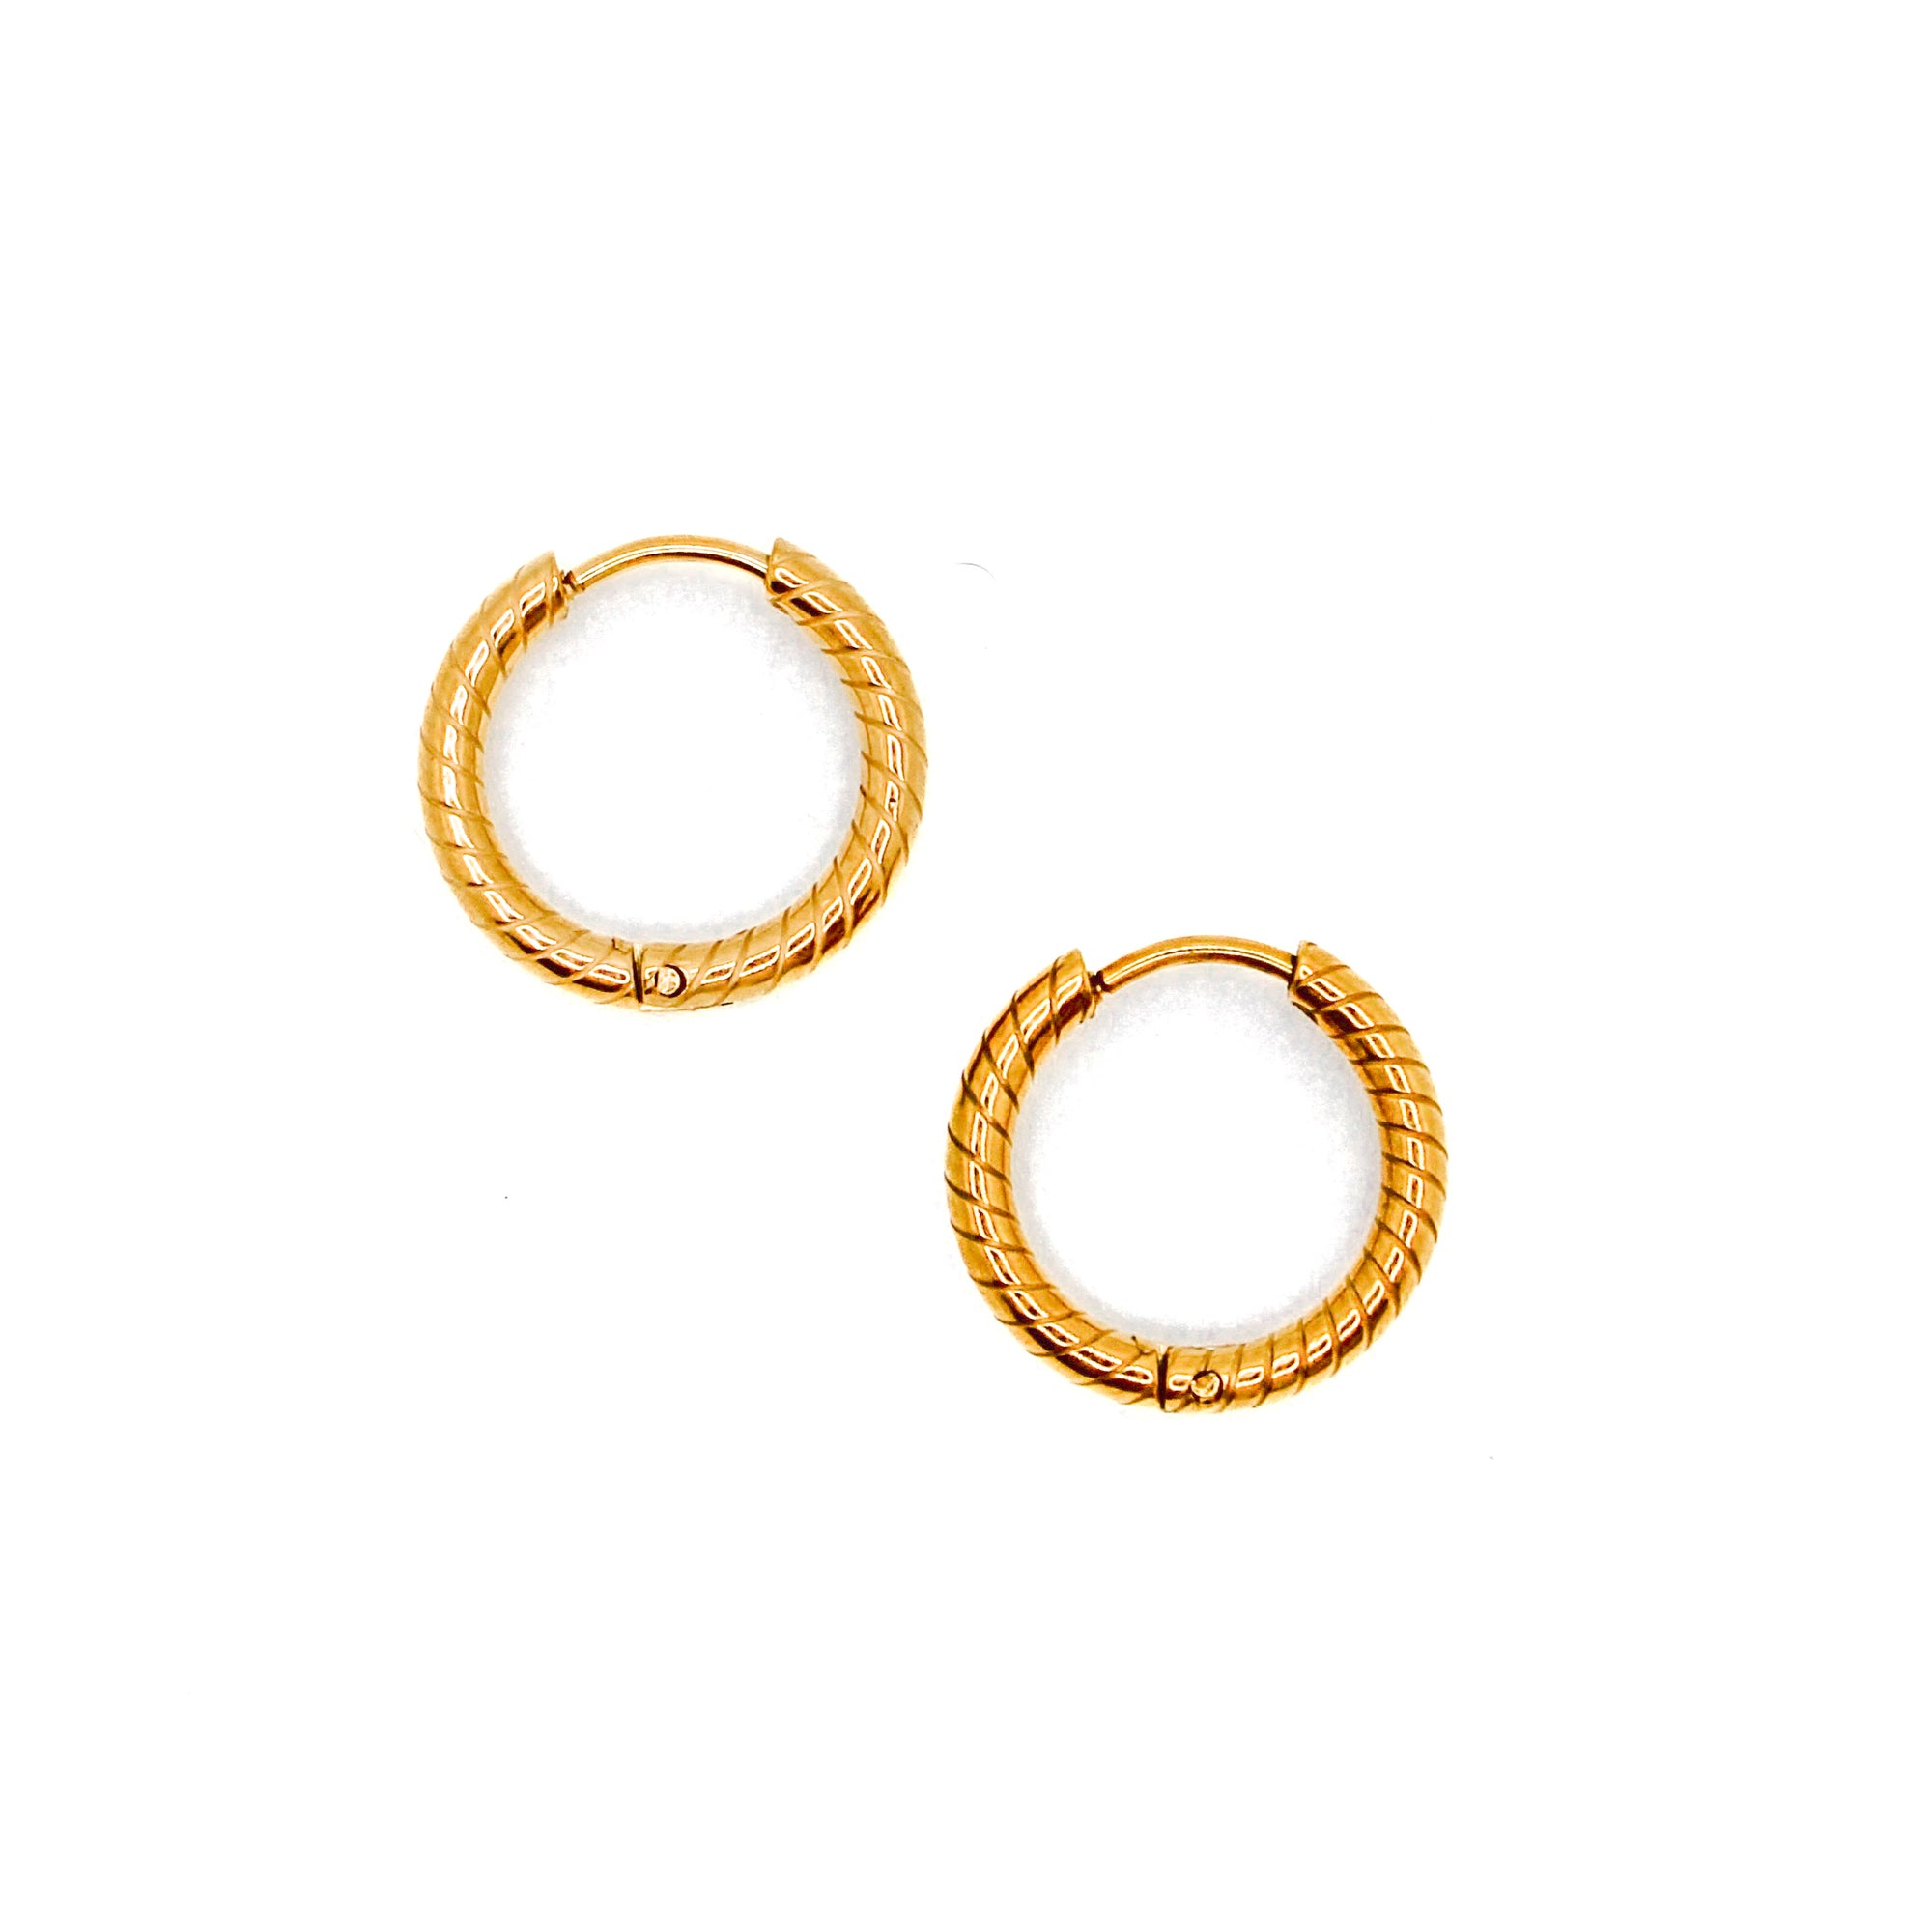 Twister Hoops - For the Girls Jewelry